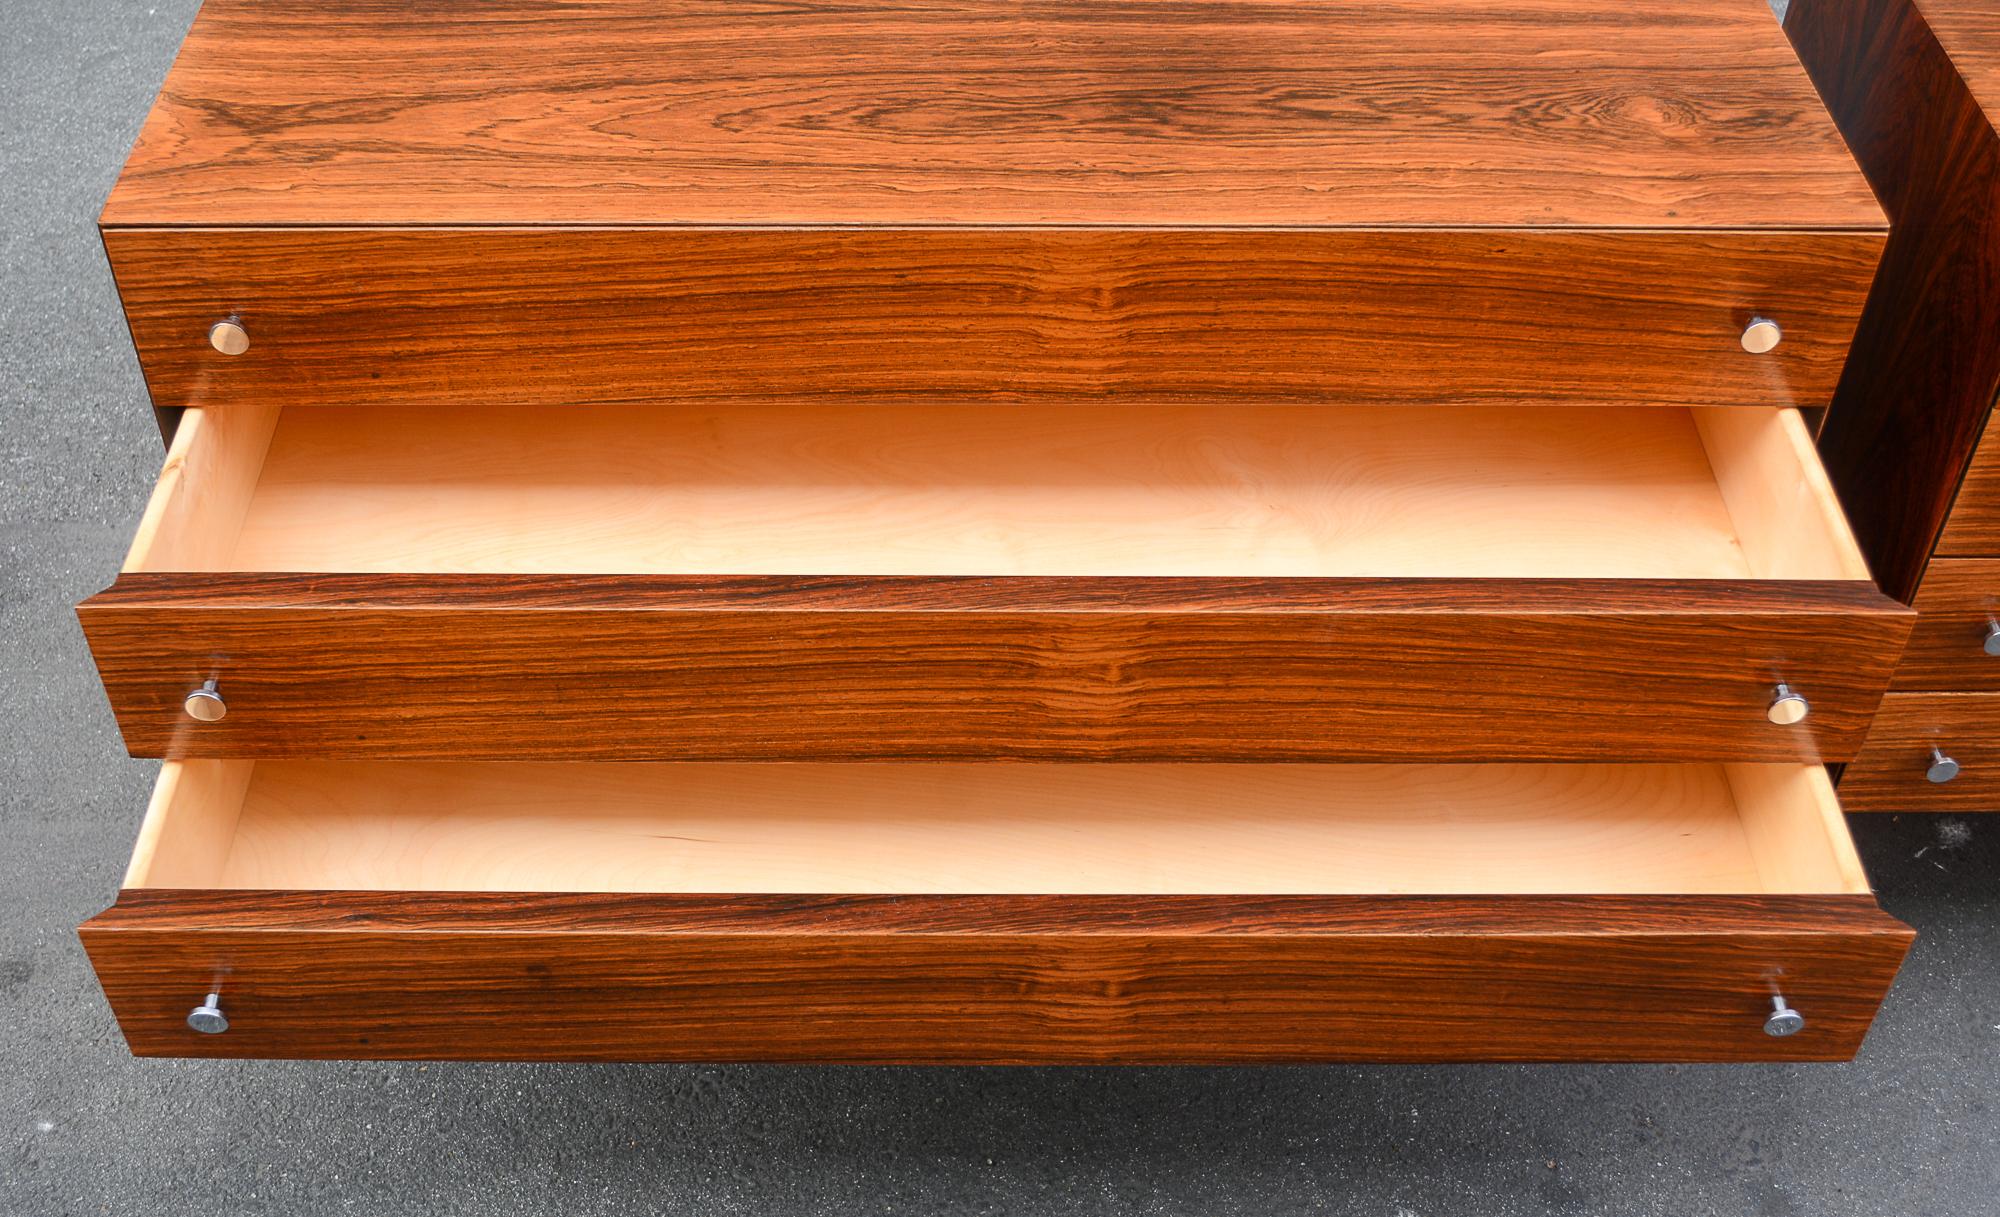 Pair of Rosewood Chests by Poul Norreklit for Sigurd Hansen For Sale 2